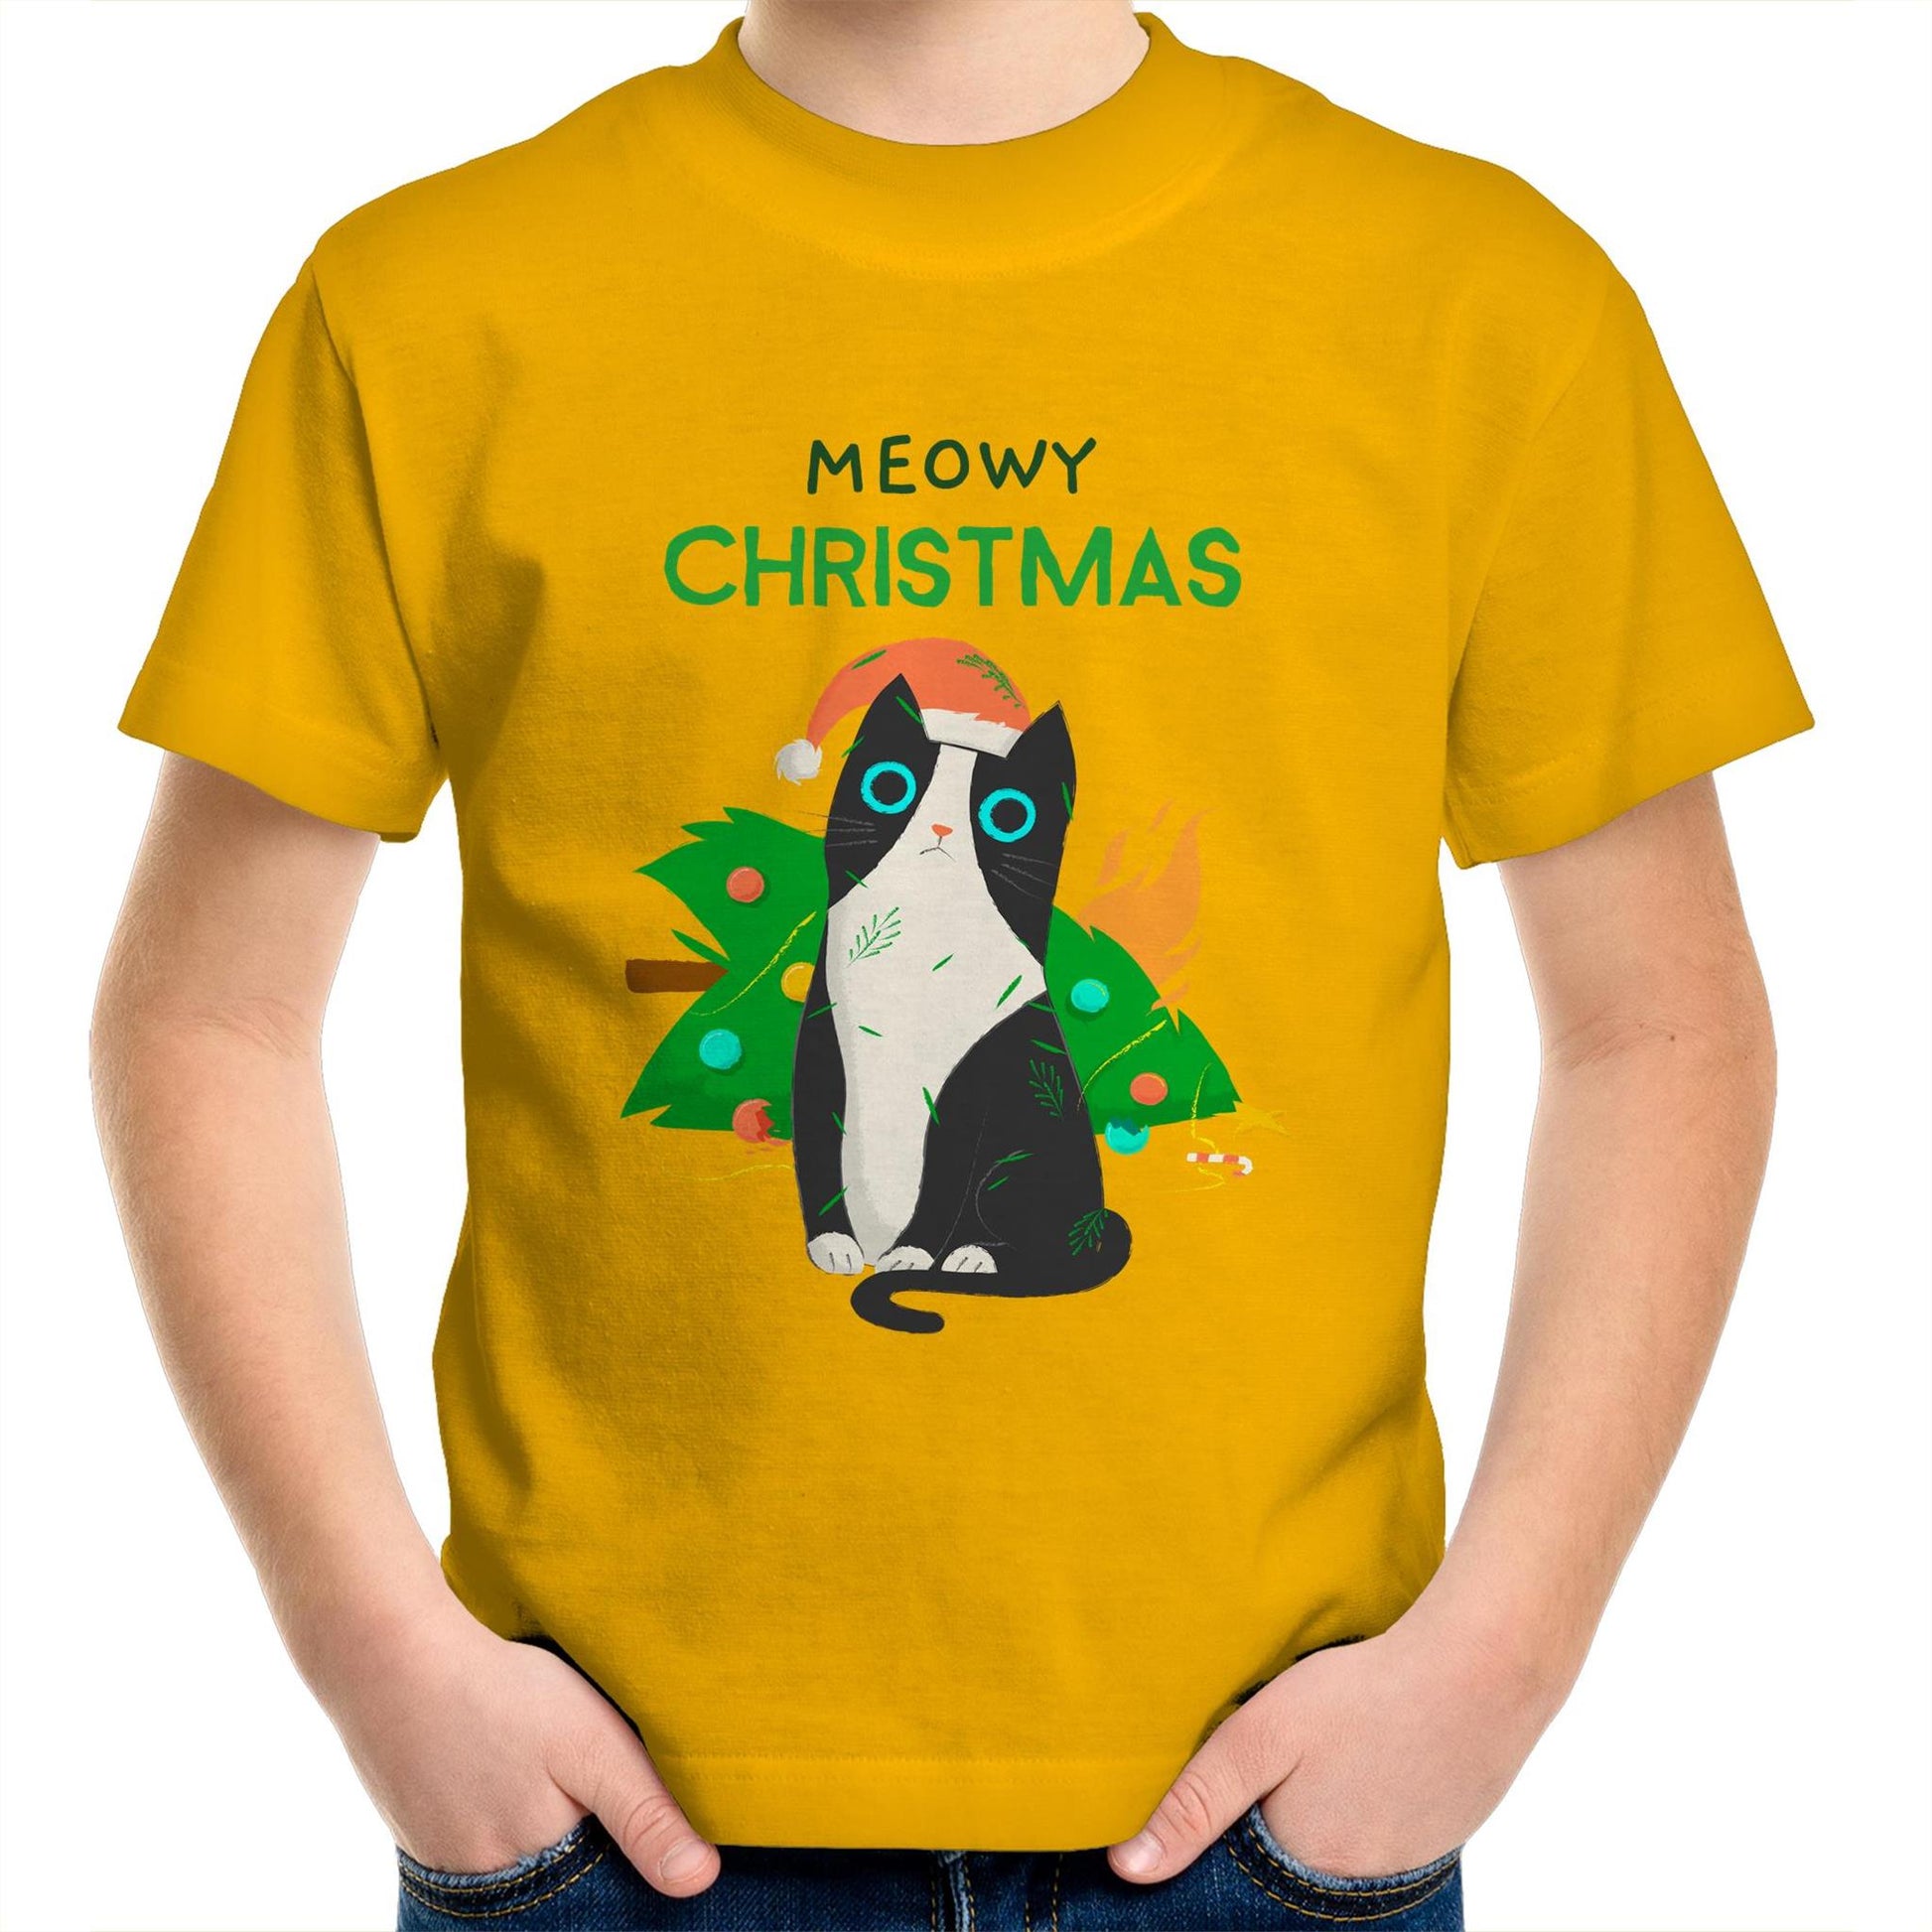 Meowy Christmas - Kids Youth Crew T-Shirt Gold Christmas Kids T-shirt Merry Christmas